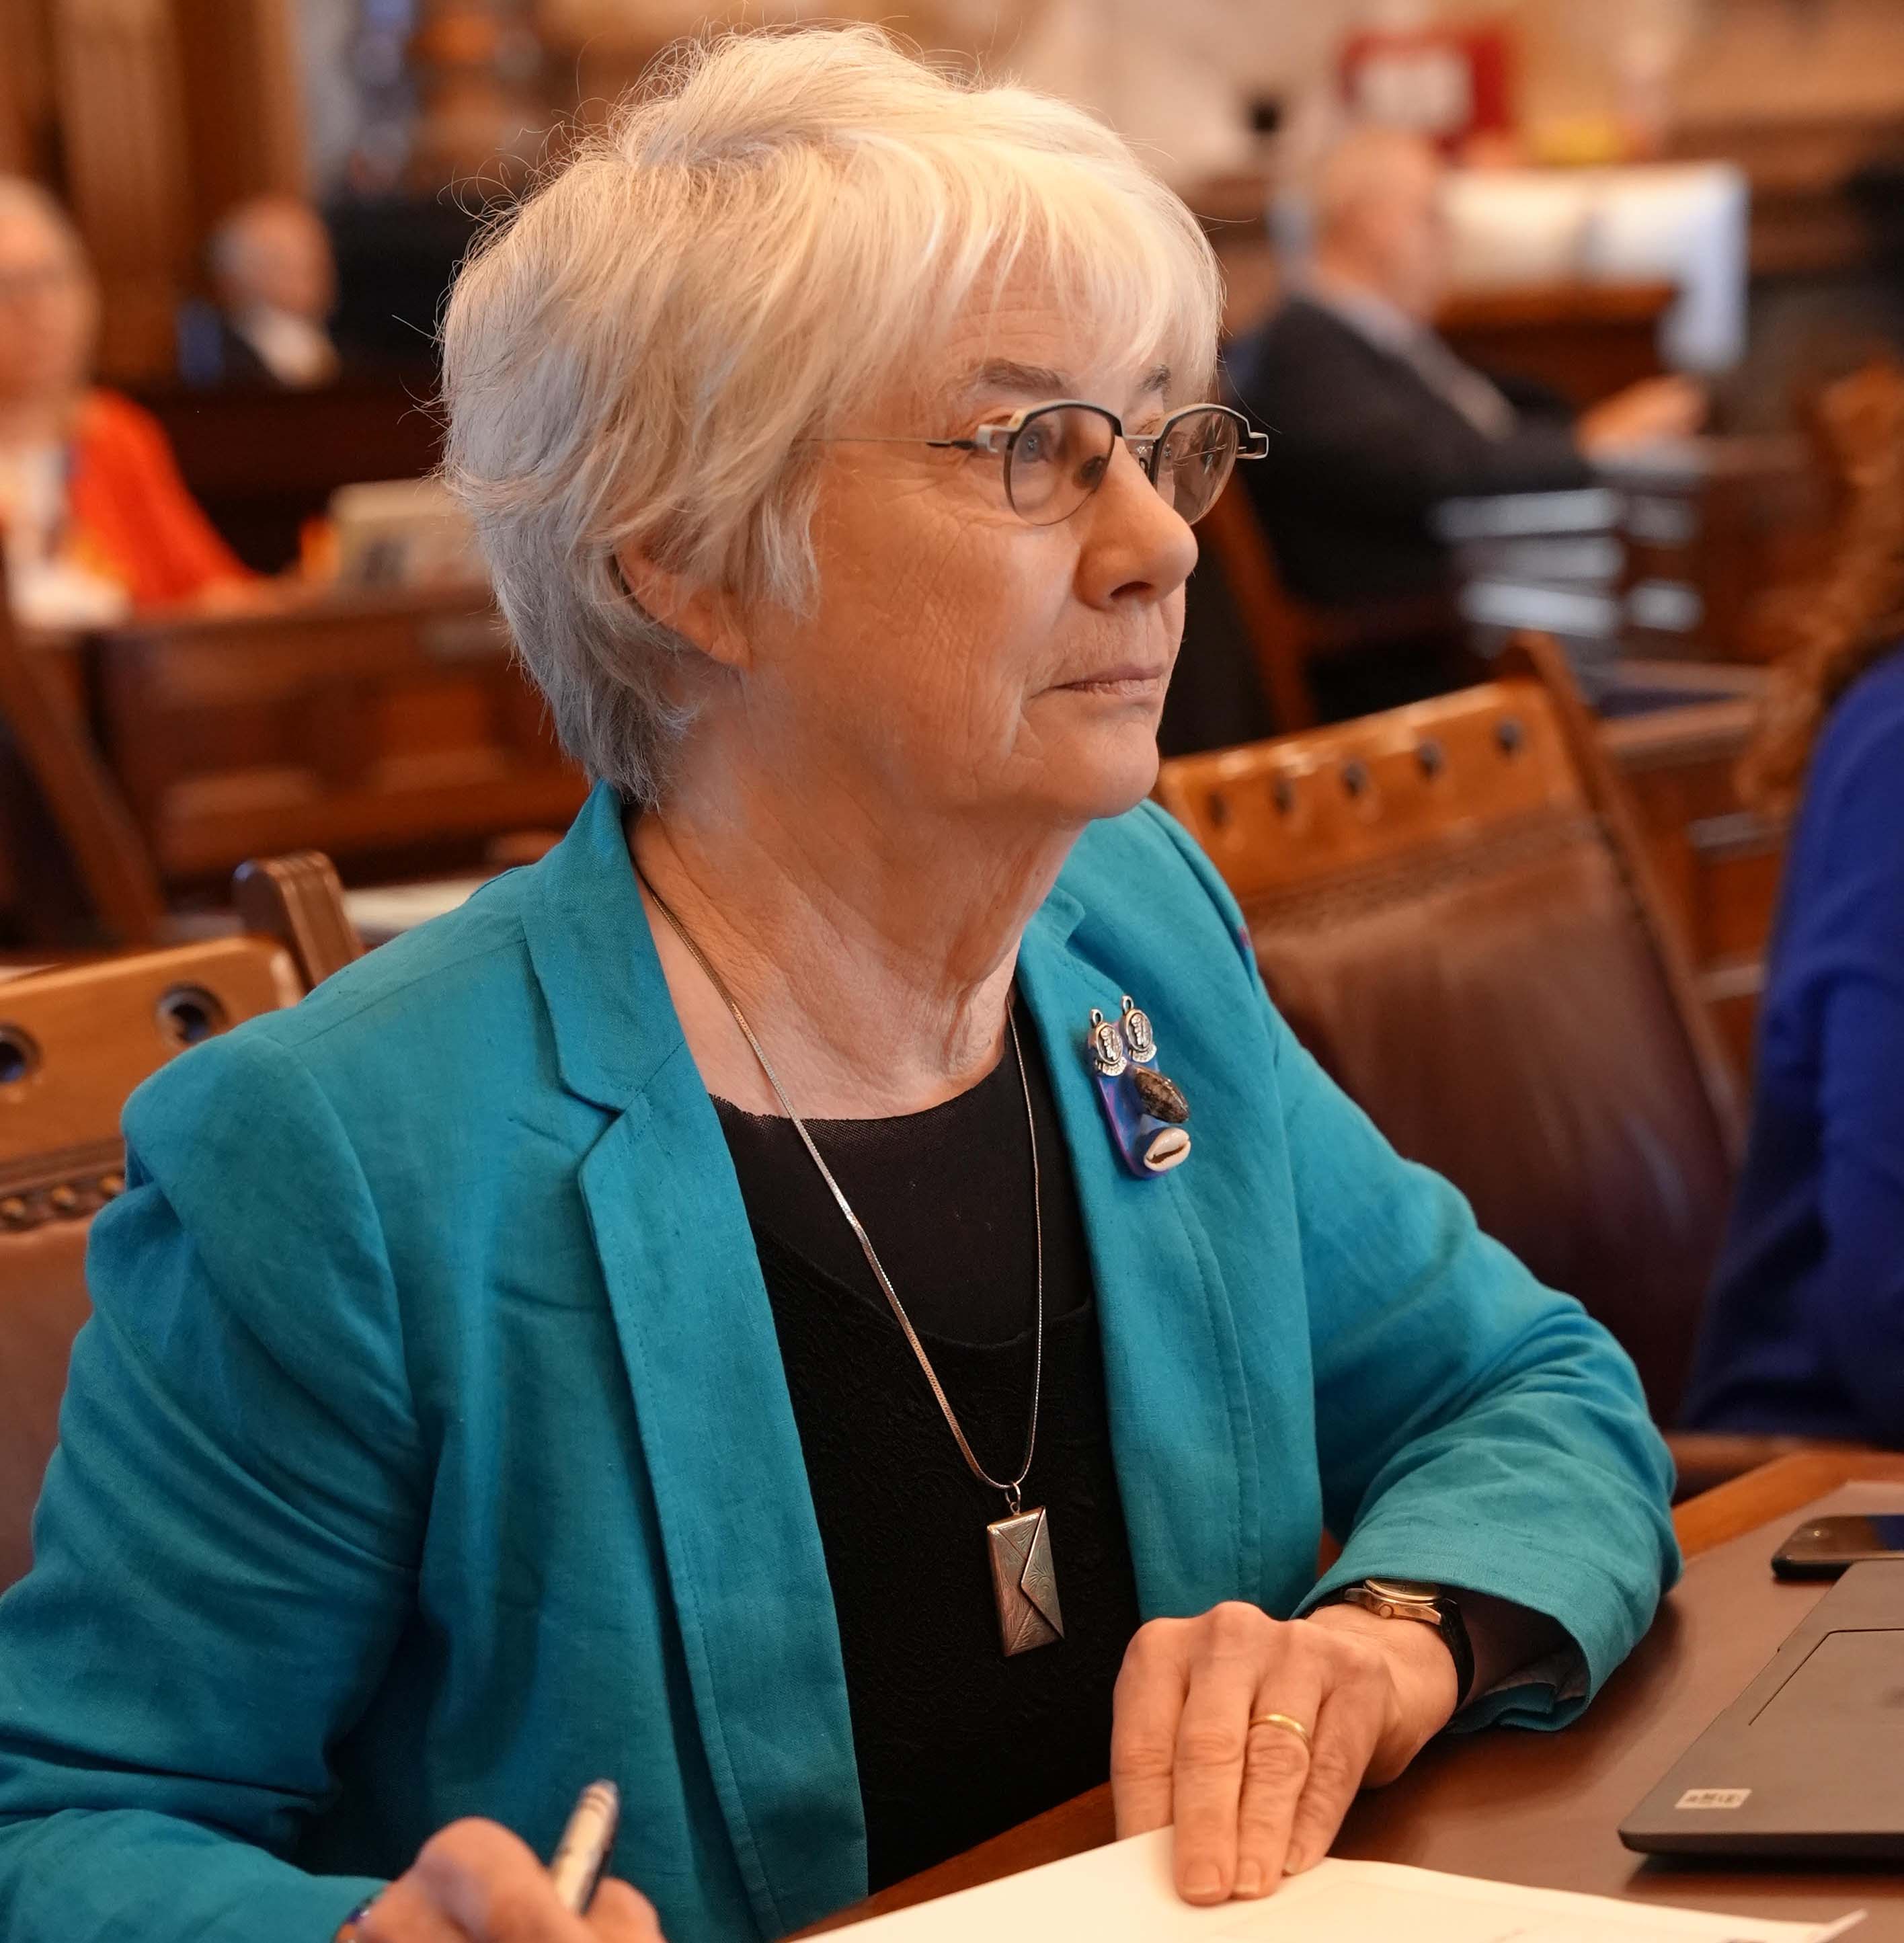 Marci in the Senate wearing a teal jacket